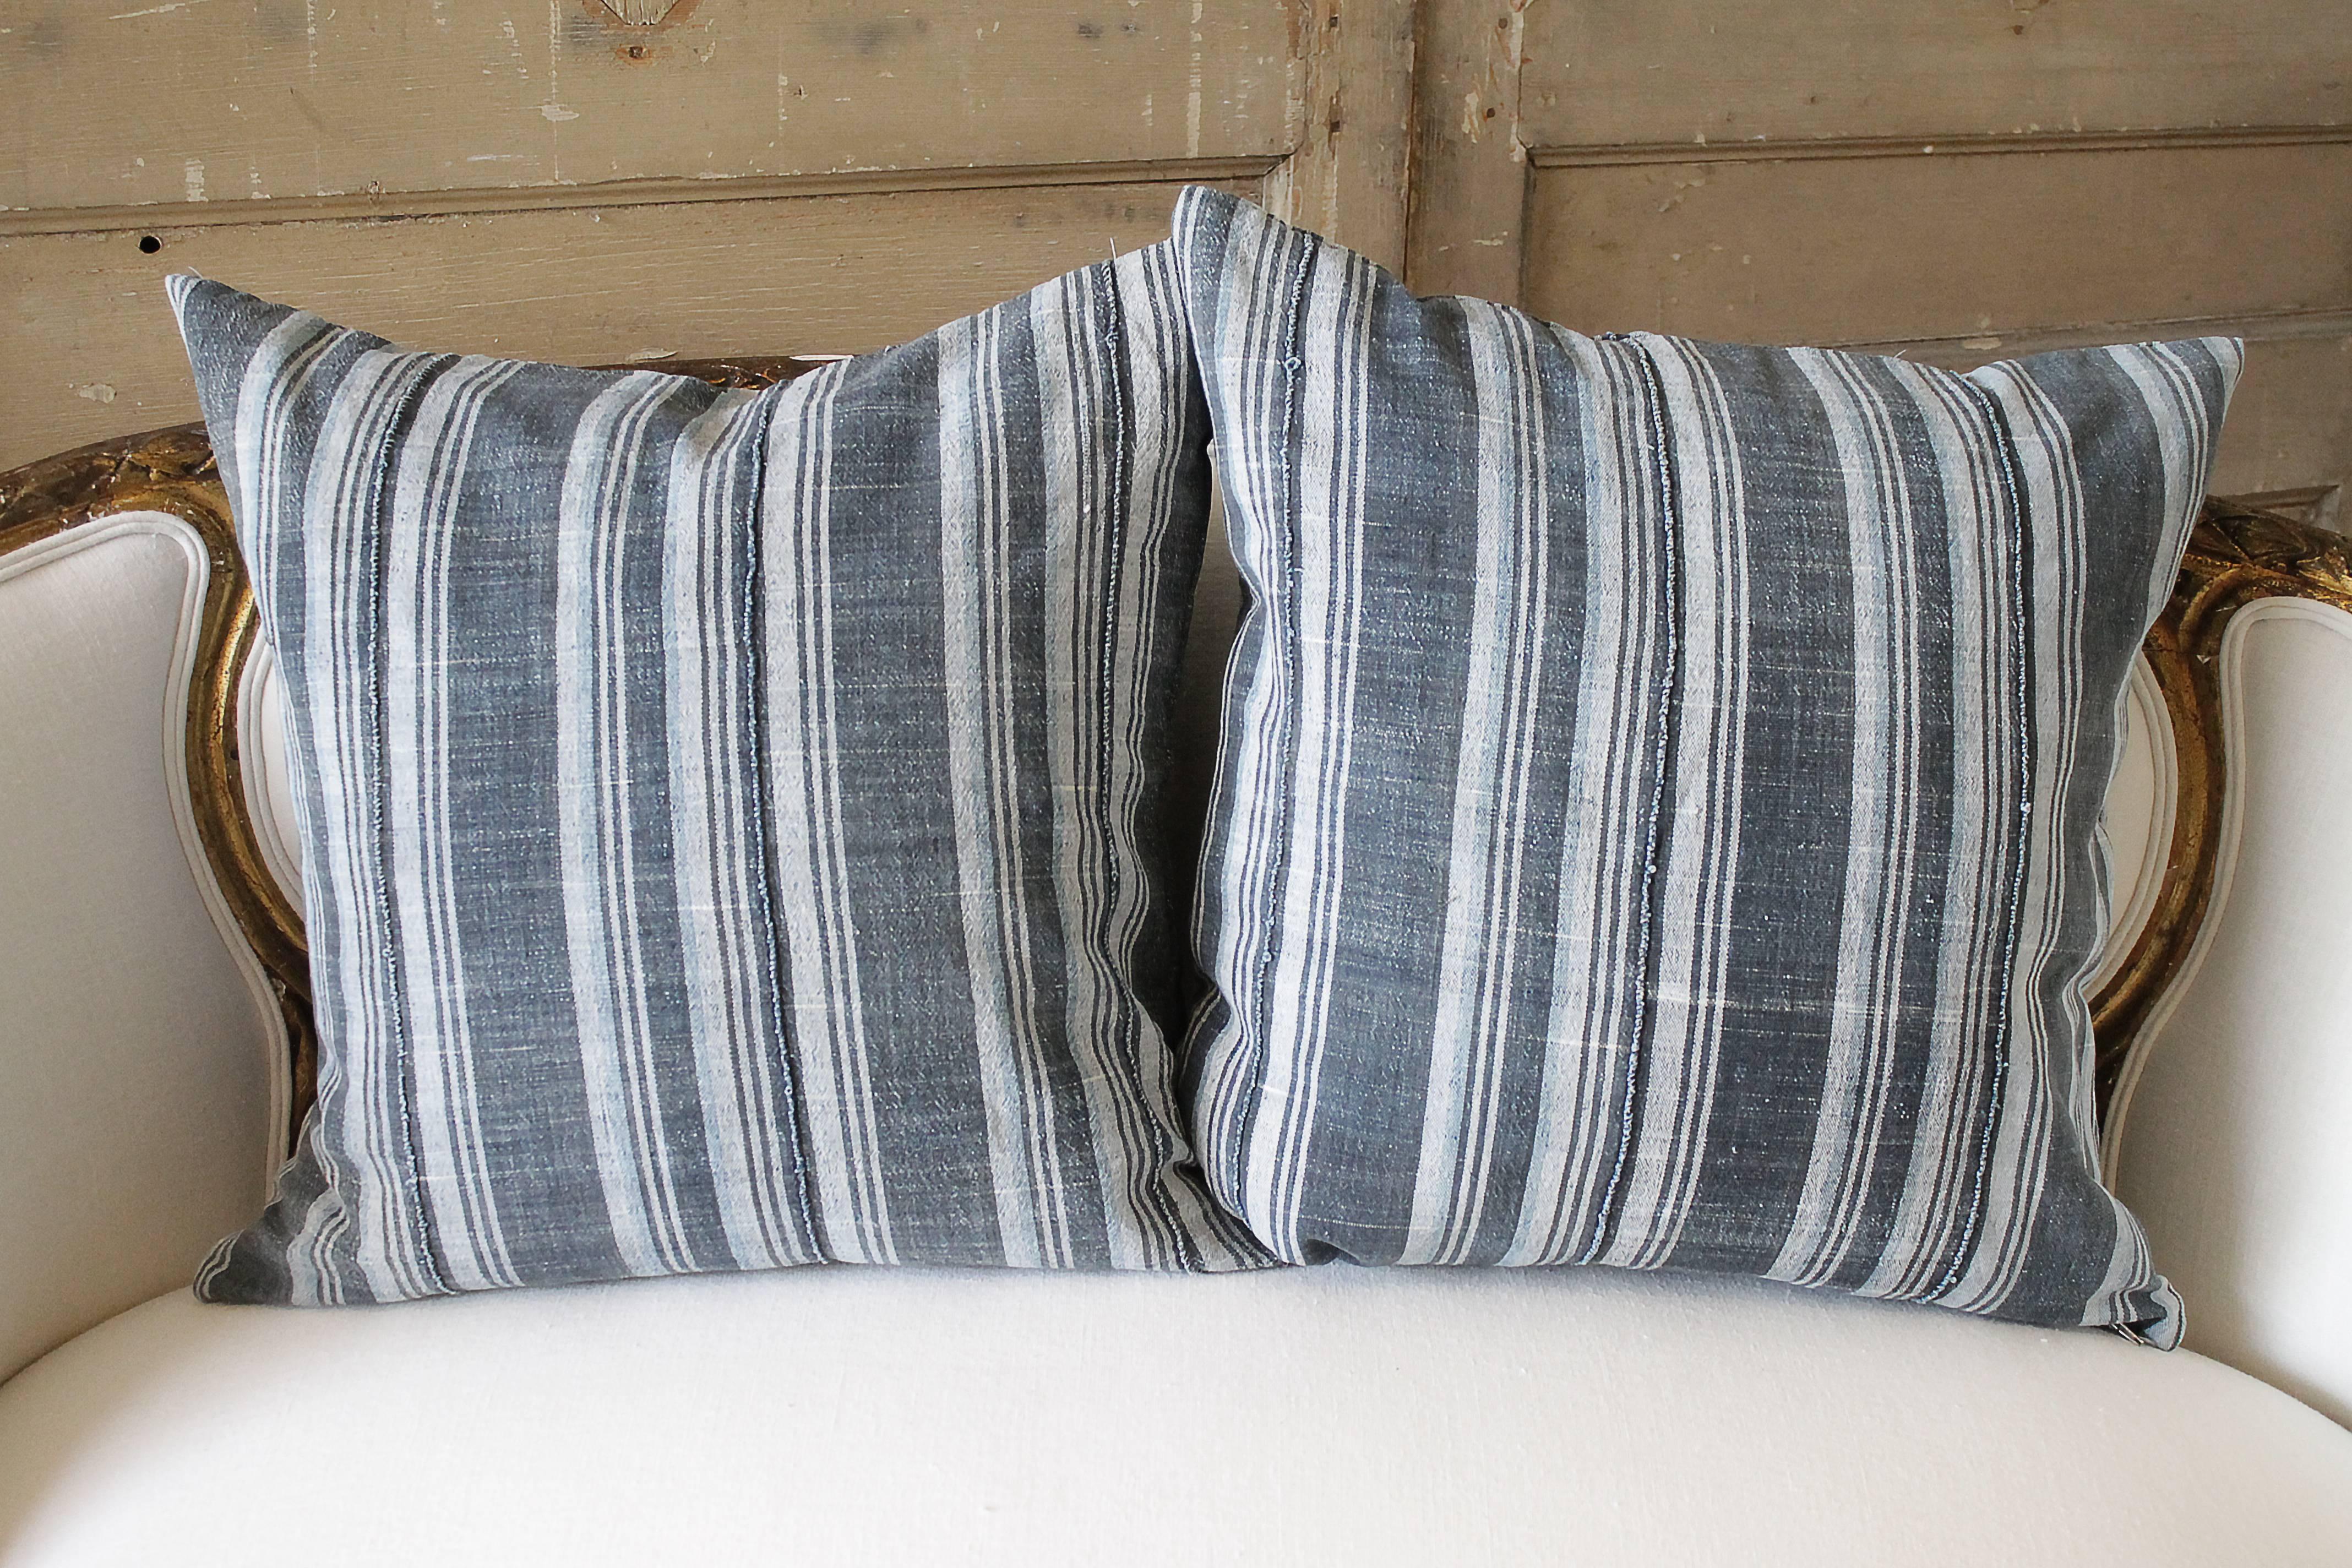 Custom-made pillow by Full Bloom cottage out of vintage indigo stripe linen with hand-stitched seams.
We pre wash all of our linens for freshness and softness, and all pillows are sewn with an overlock seam to prevent fraying. Zipper